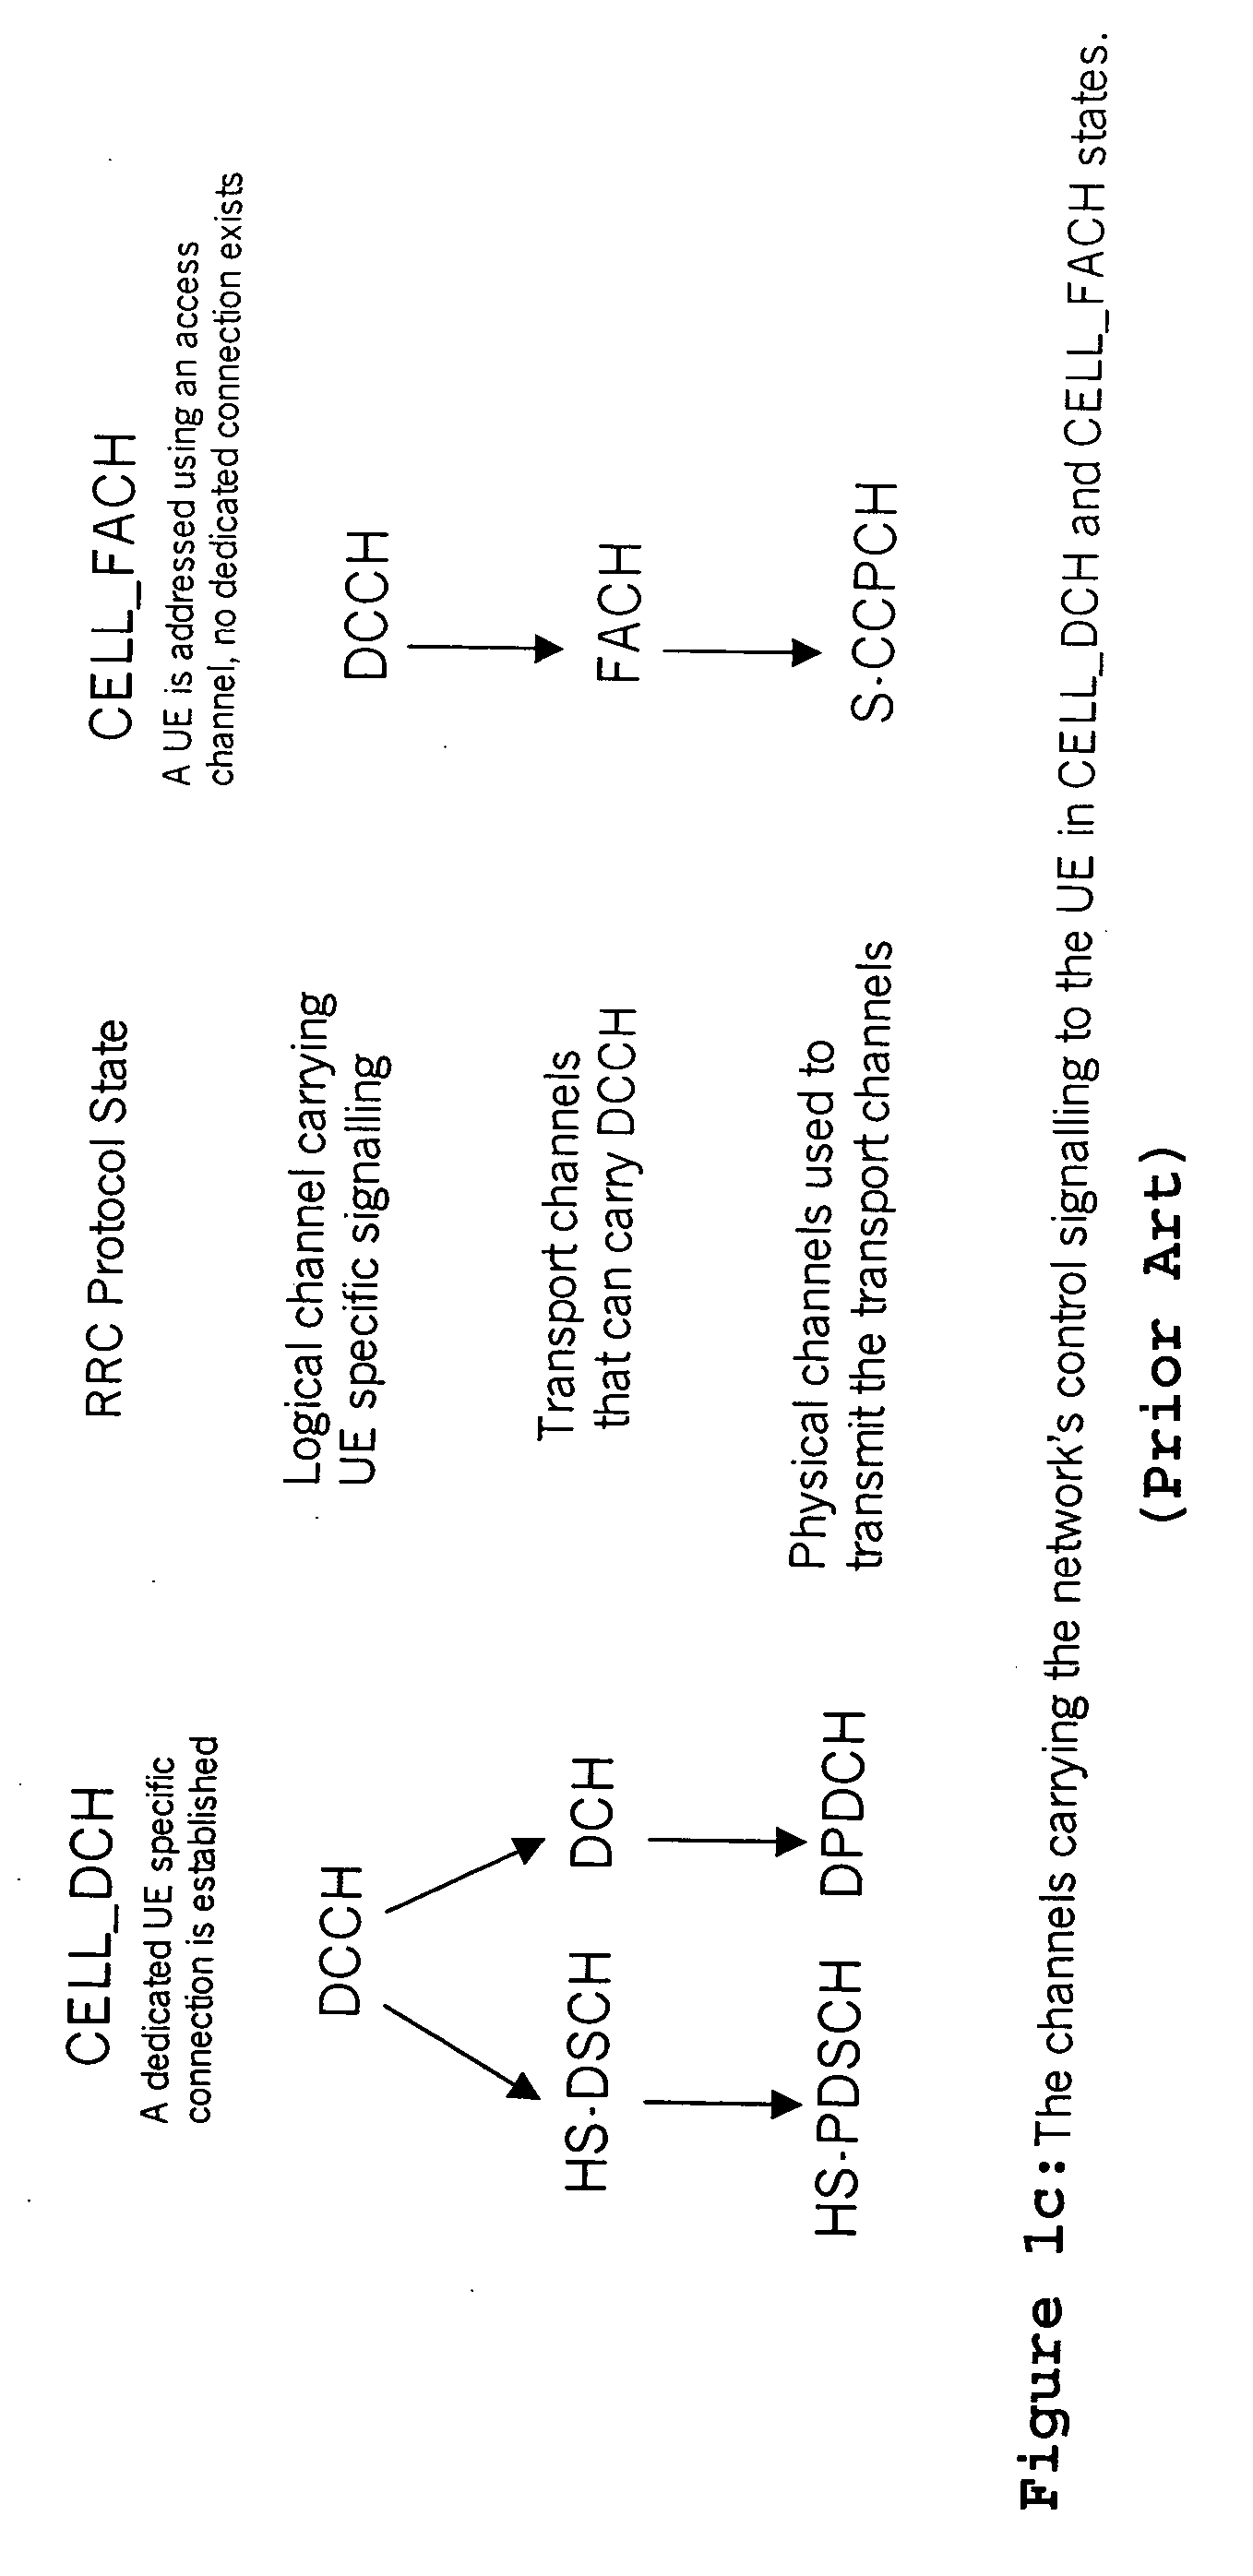 Recovery method for lost signaling connection with HSDPA/fractional DPCH